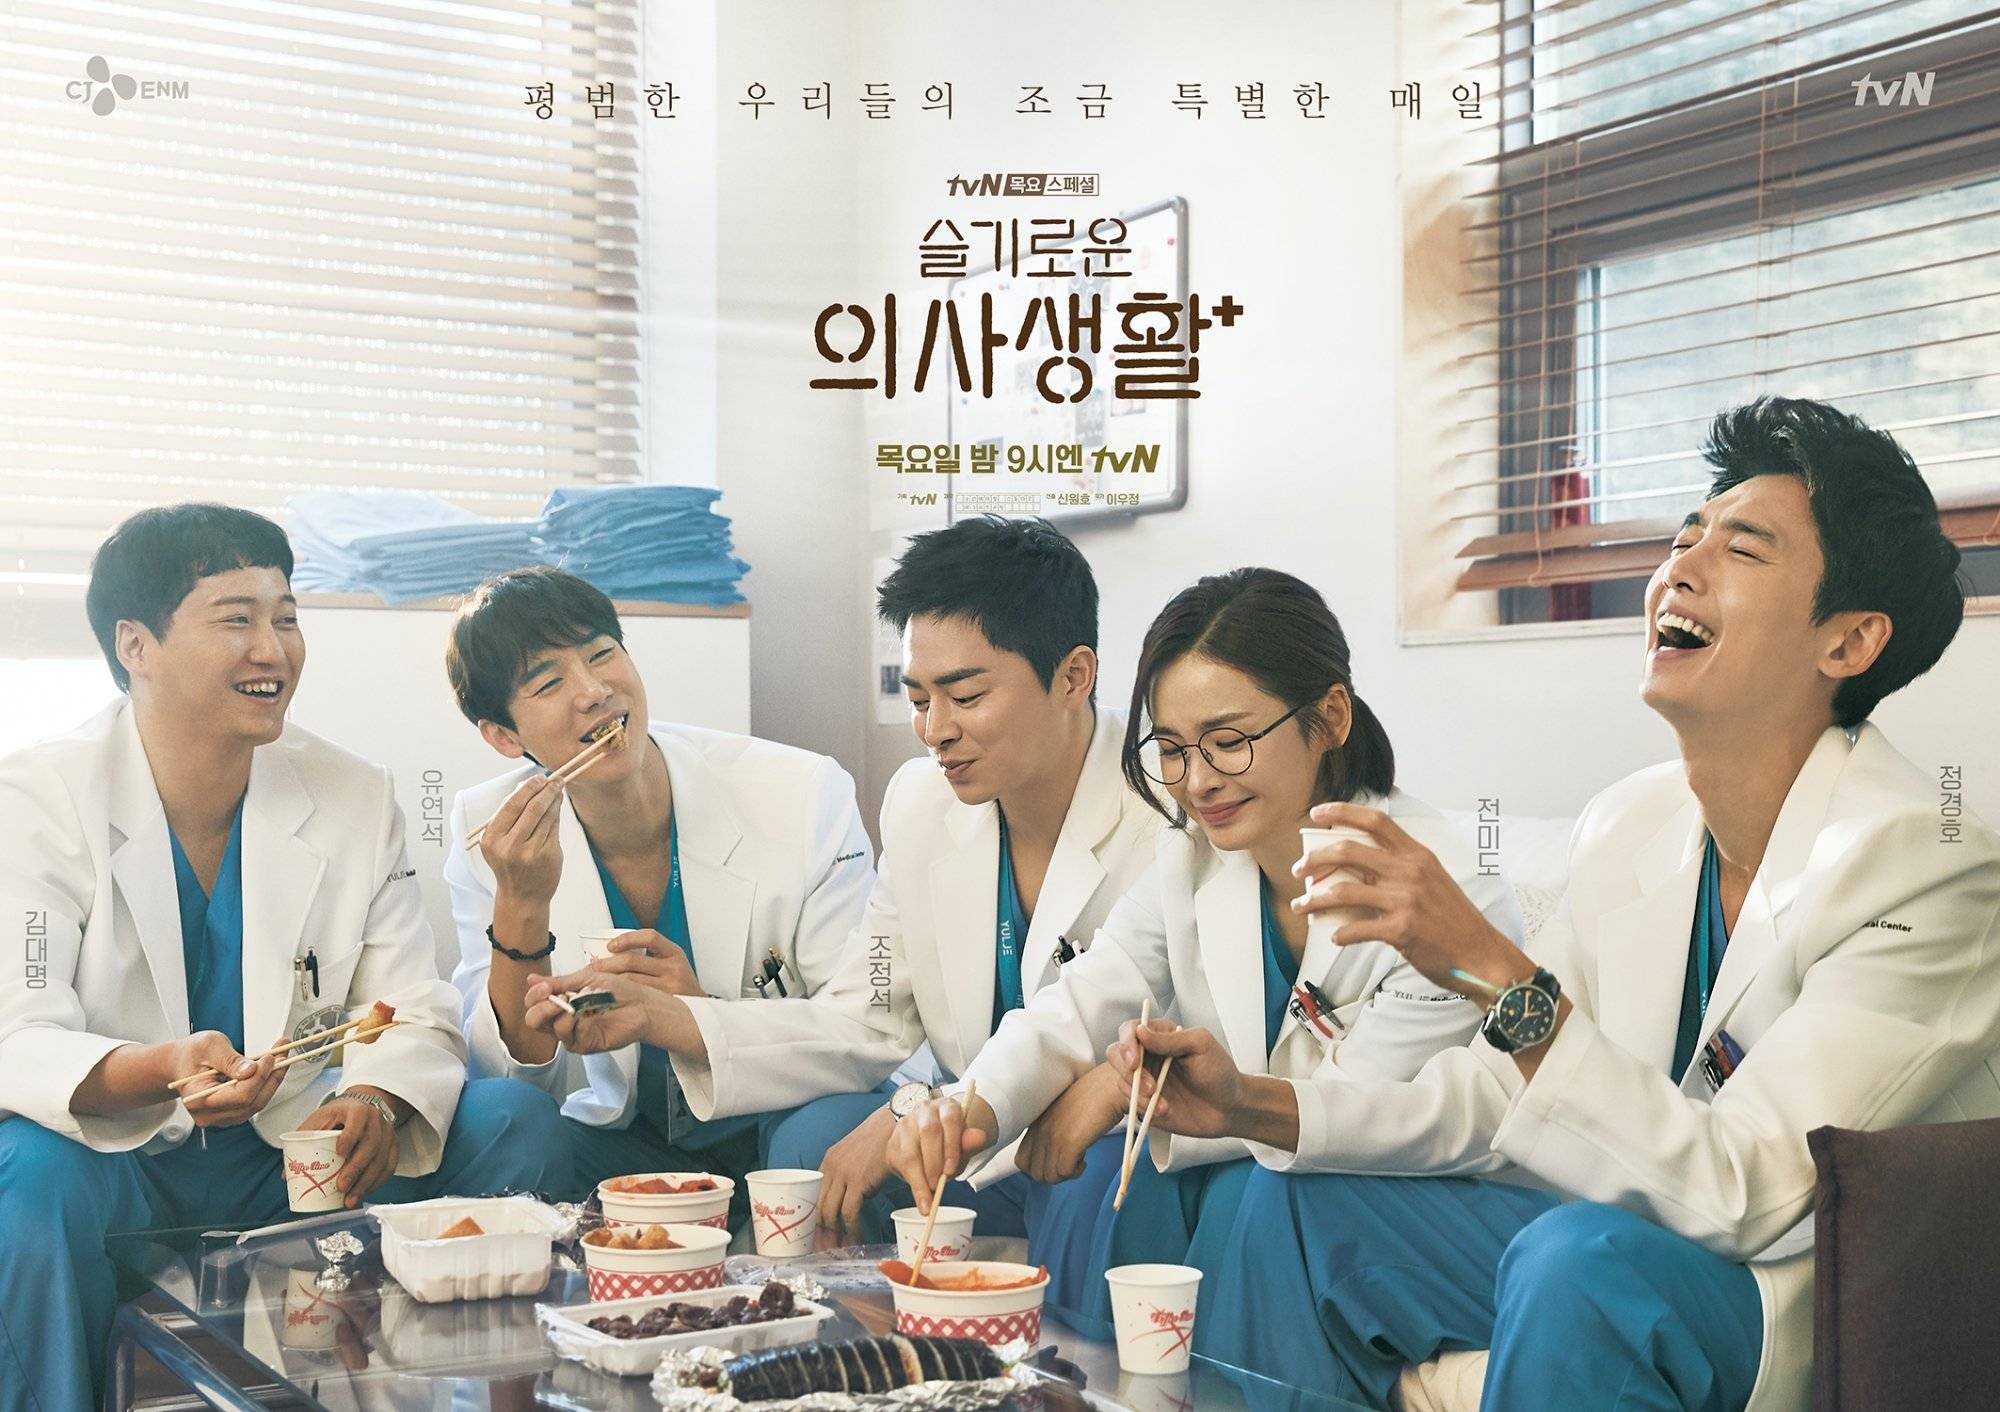 Photos] New Stills and Poster Added for the Korean Drama "Hospital ...